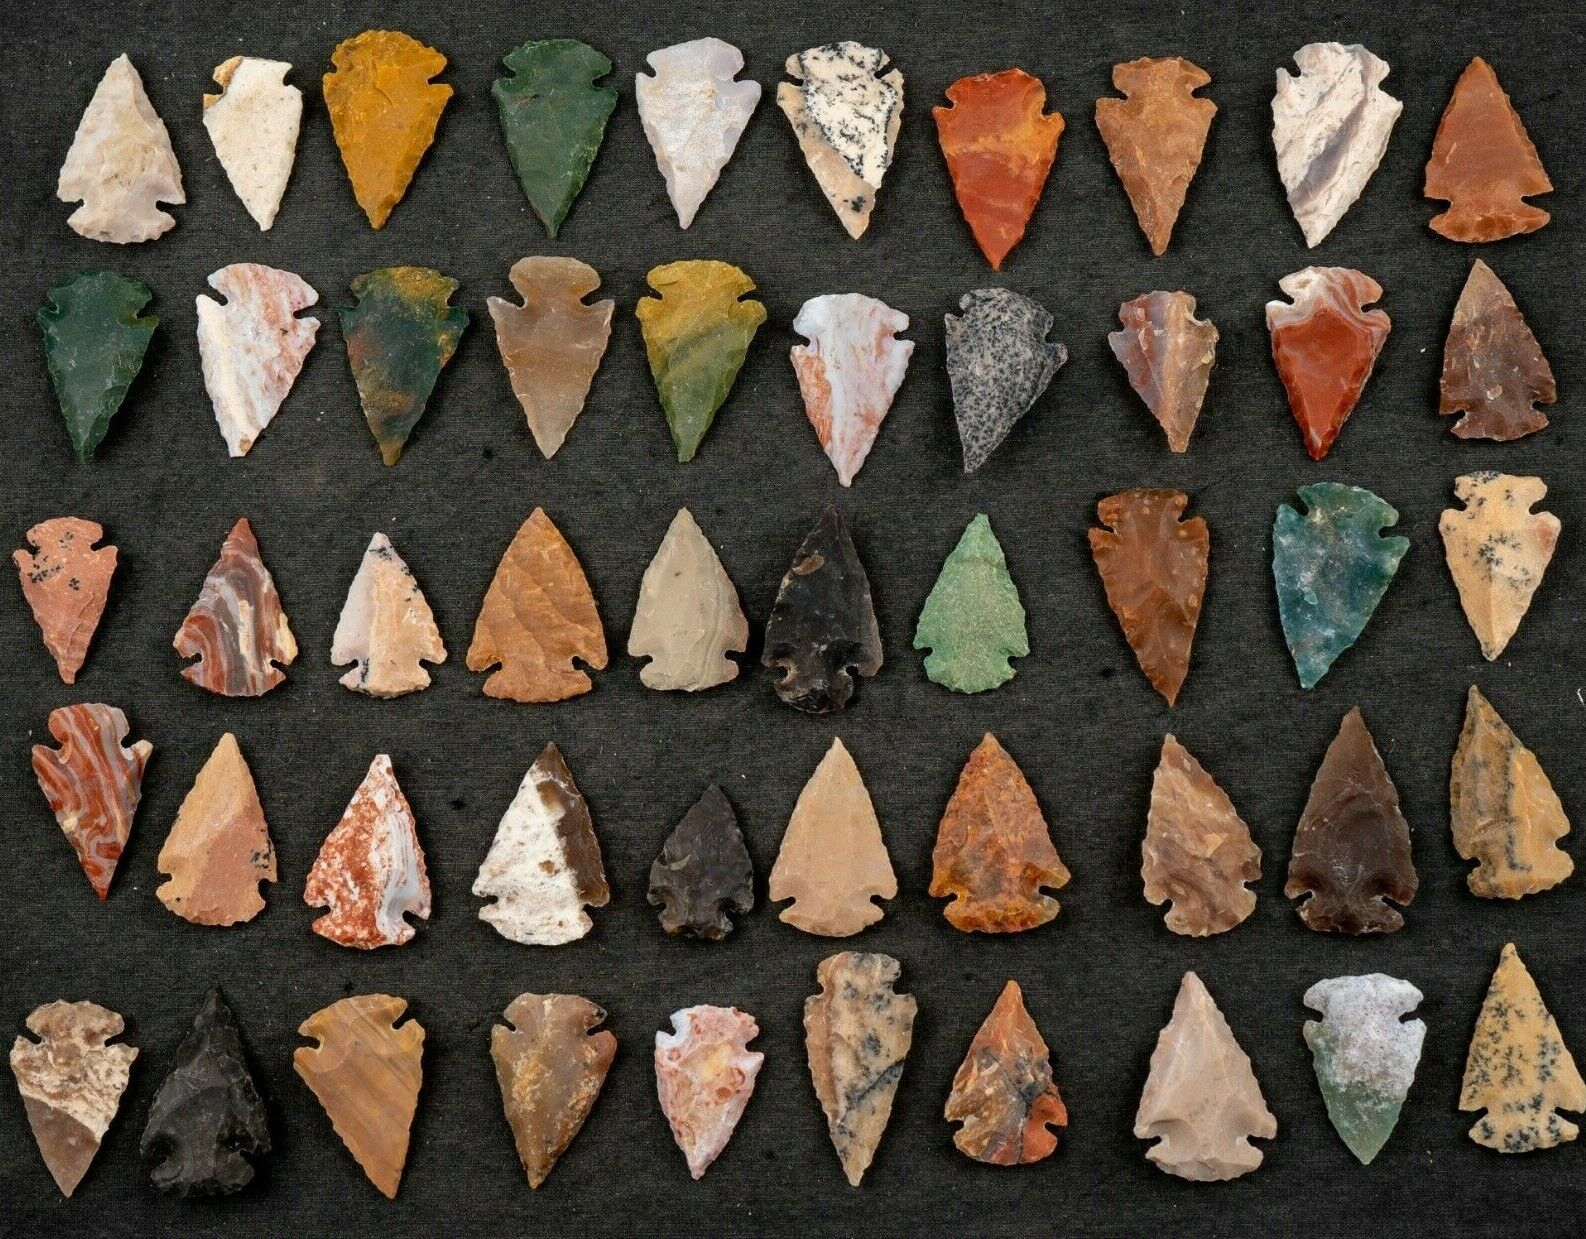 *** 50 PC Lot Flint Arrowhead OH Collection Project Spear Points Knife Blade *** Без бренда - фотография #3